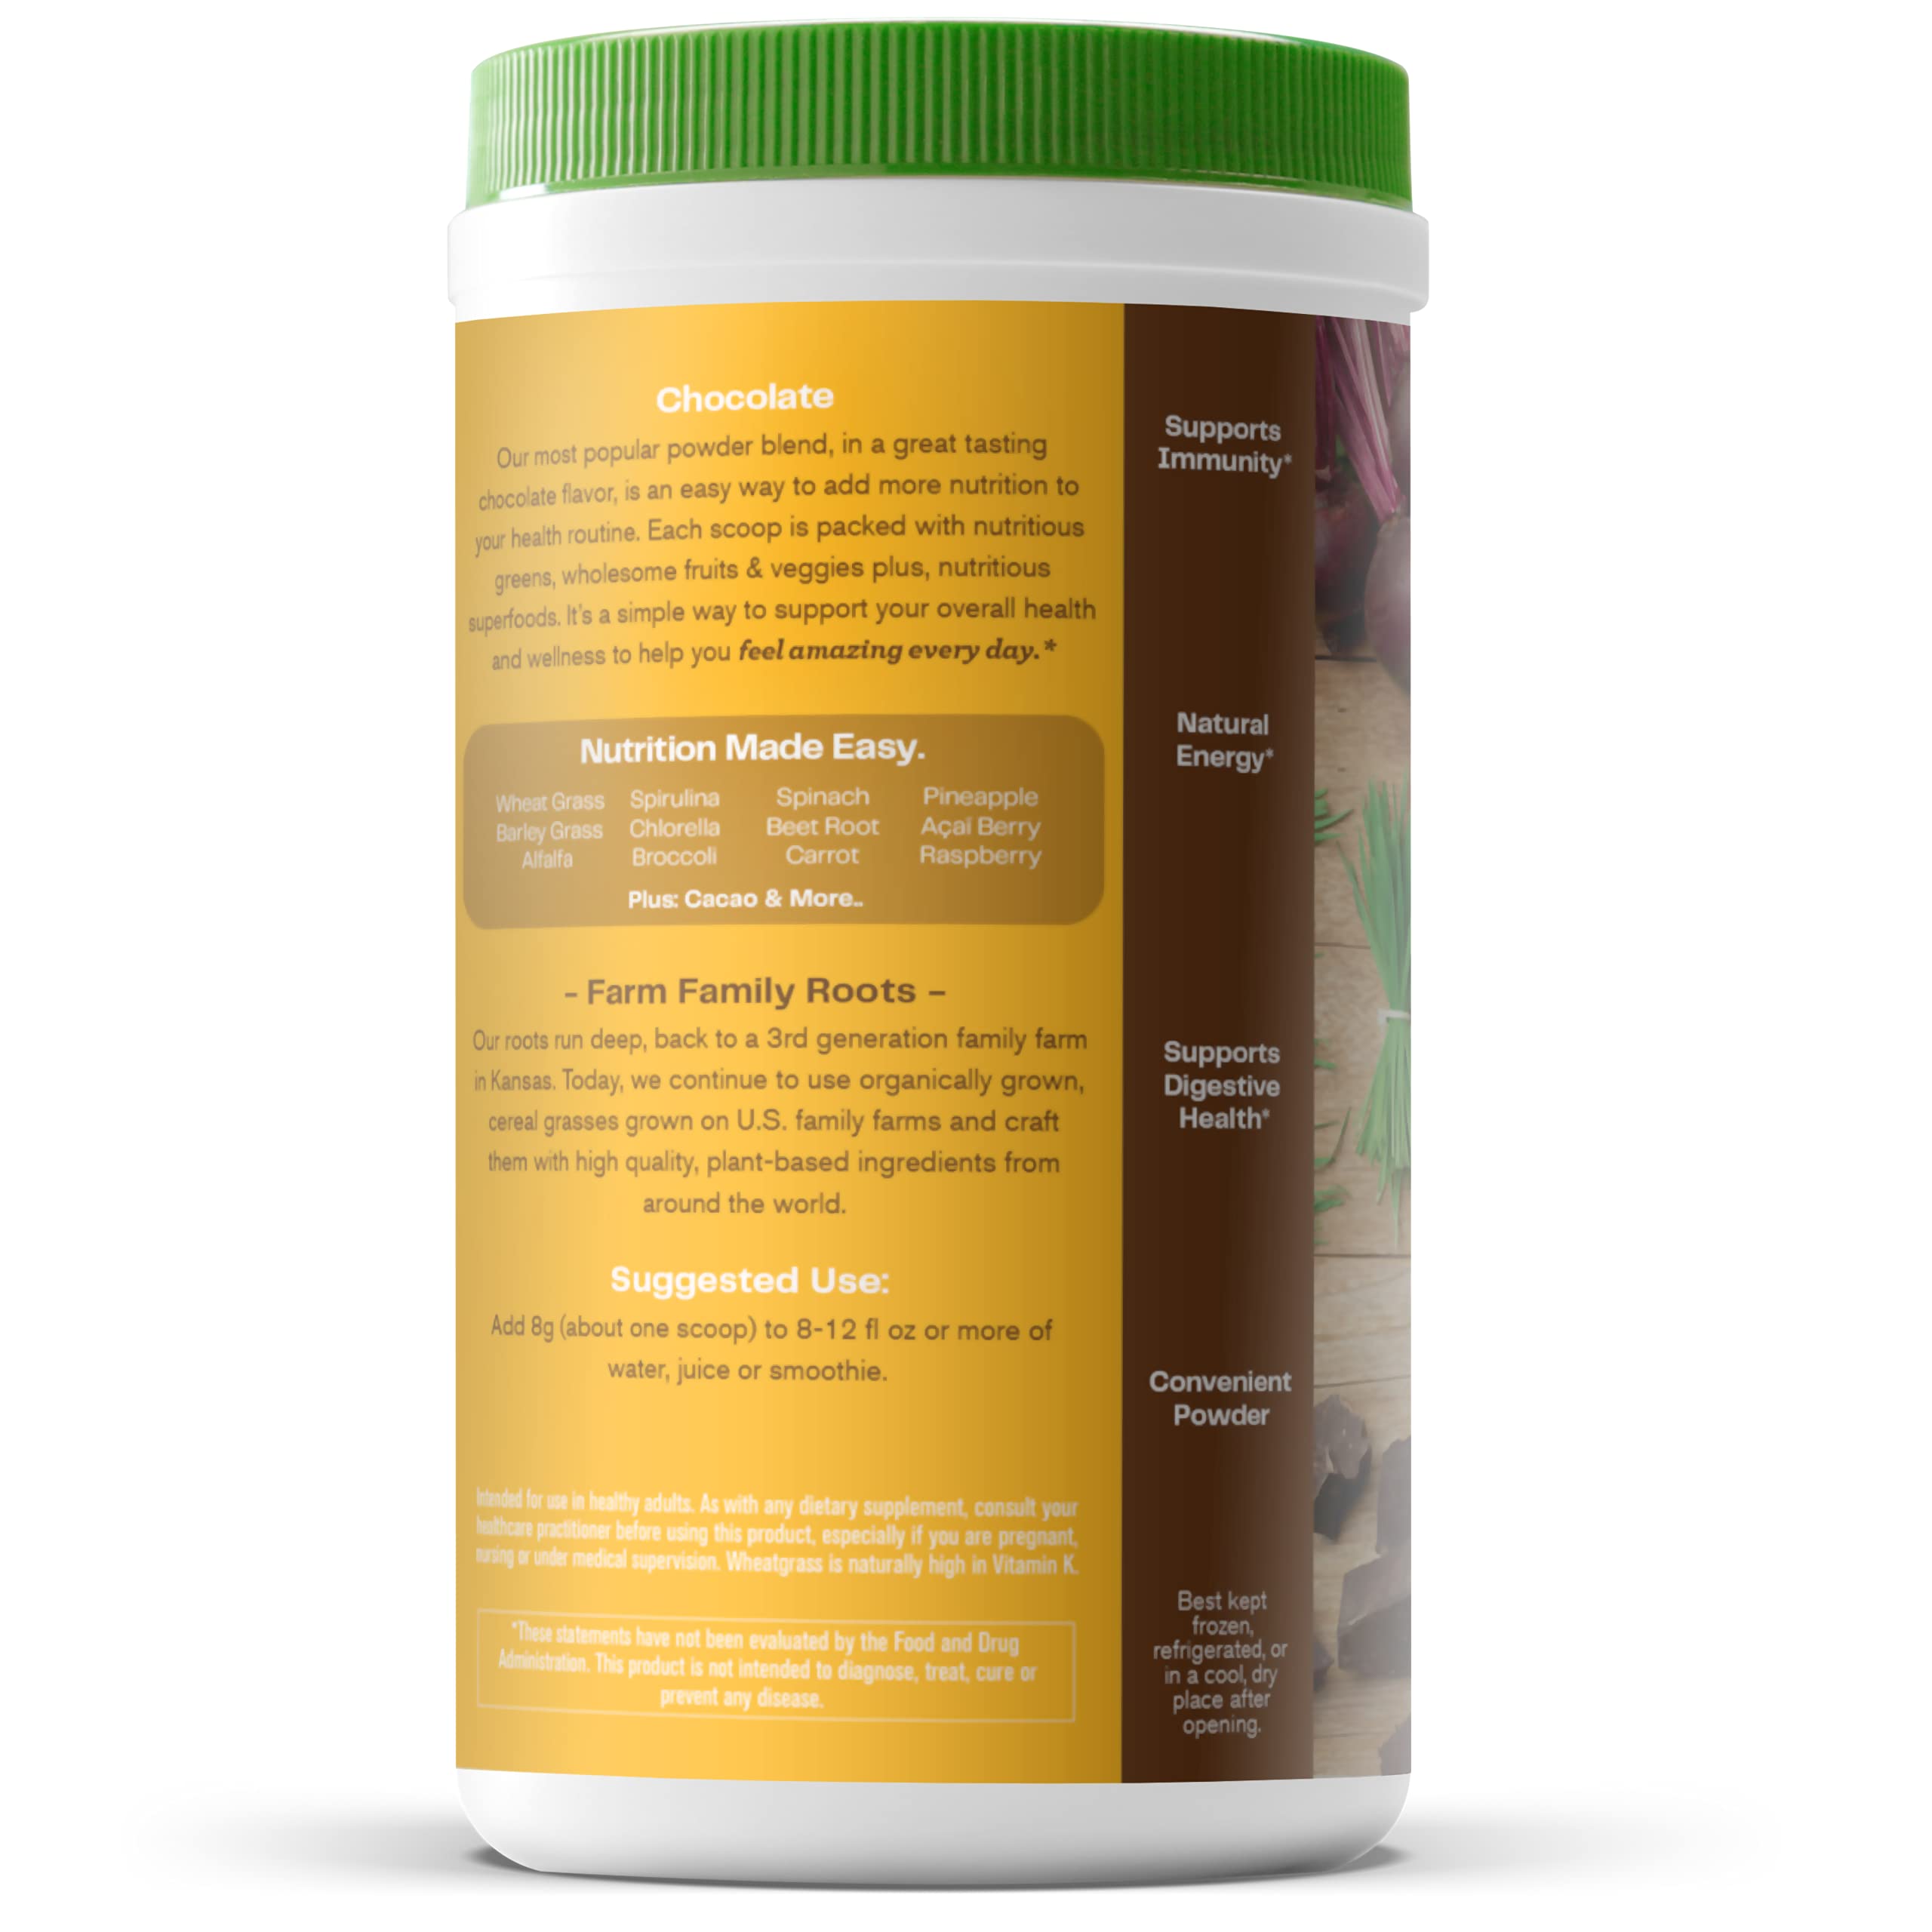 Amazing Grass Greens Blend Superfood: Super Greens Powder Smoothie Mix with Organic Spirulina, Chlorella, Beet Root Powder, Digestive Enzymes & Probiotics, Chocolate, 60 Servings (Packaging May Vary)